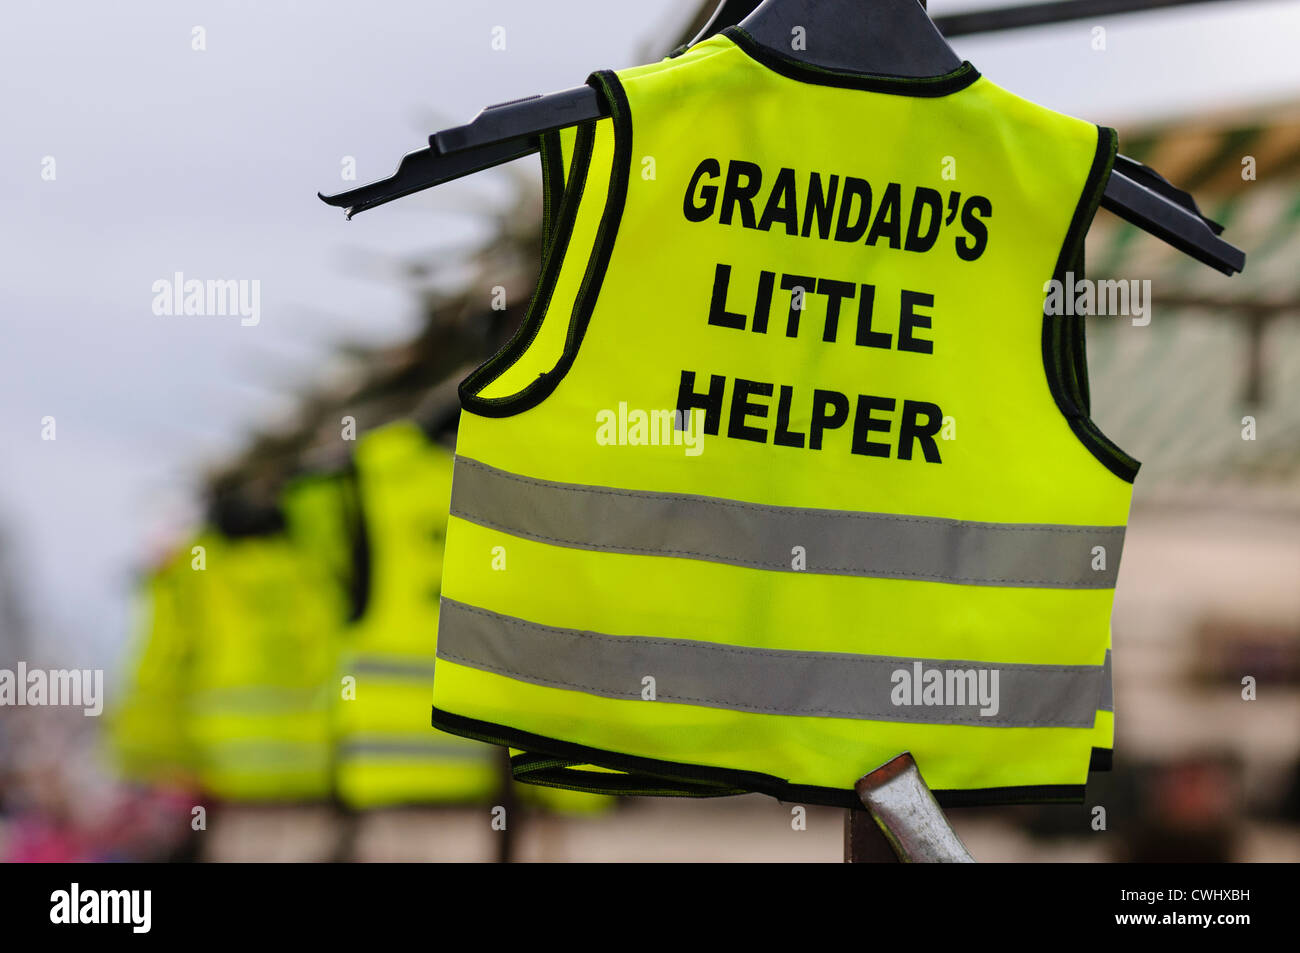 High visibility vests with slogan 'Grandad's Little Helper' on sale at a market stall Stock Photo